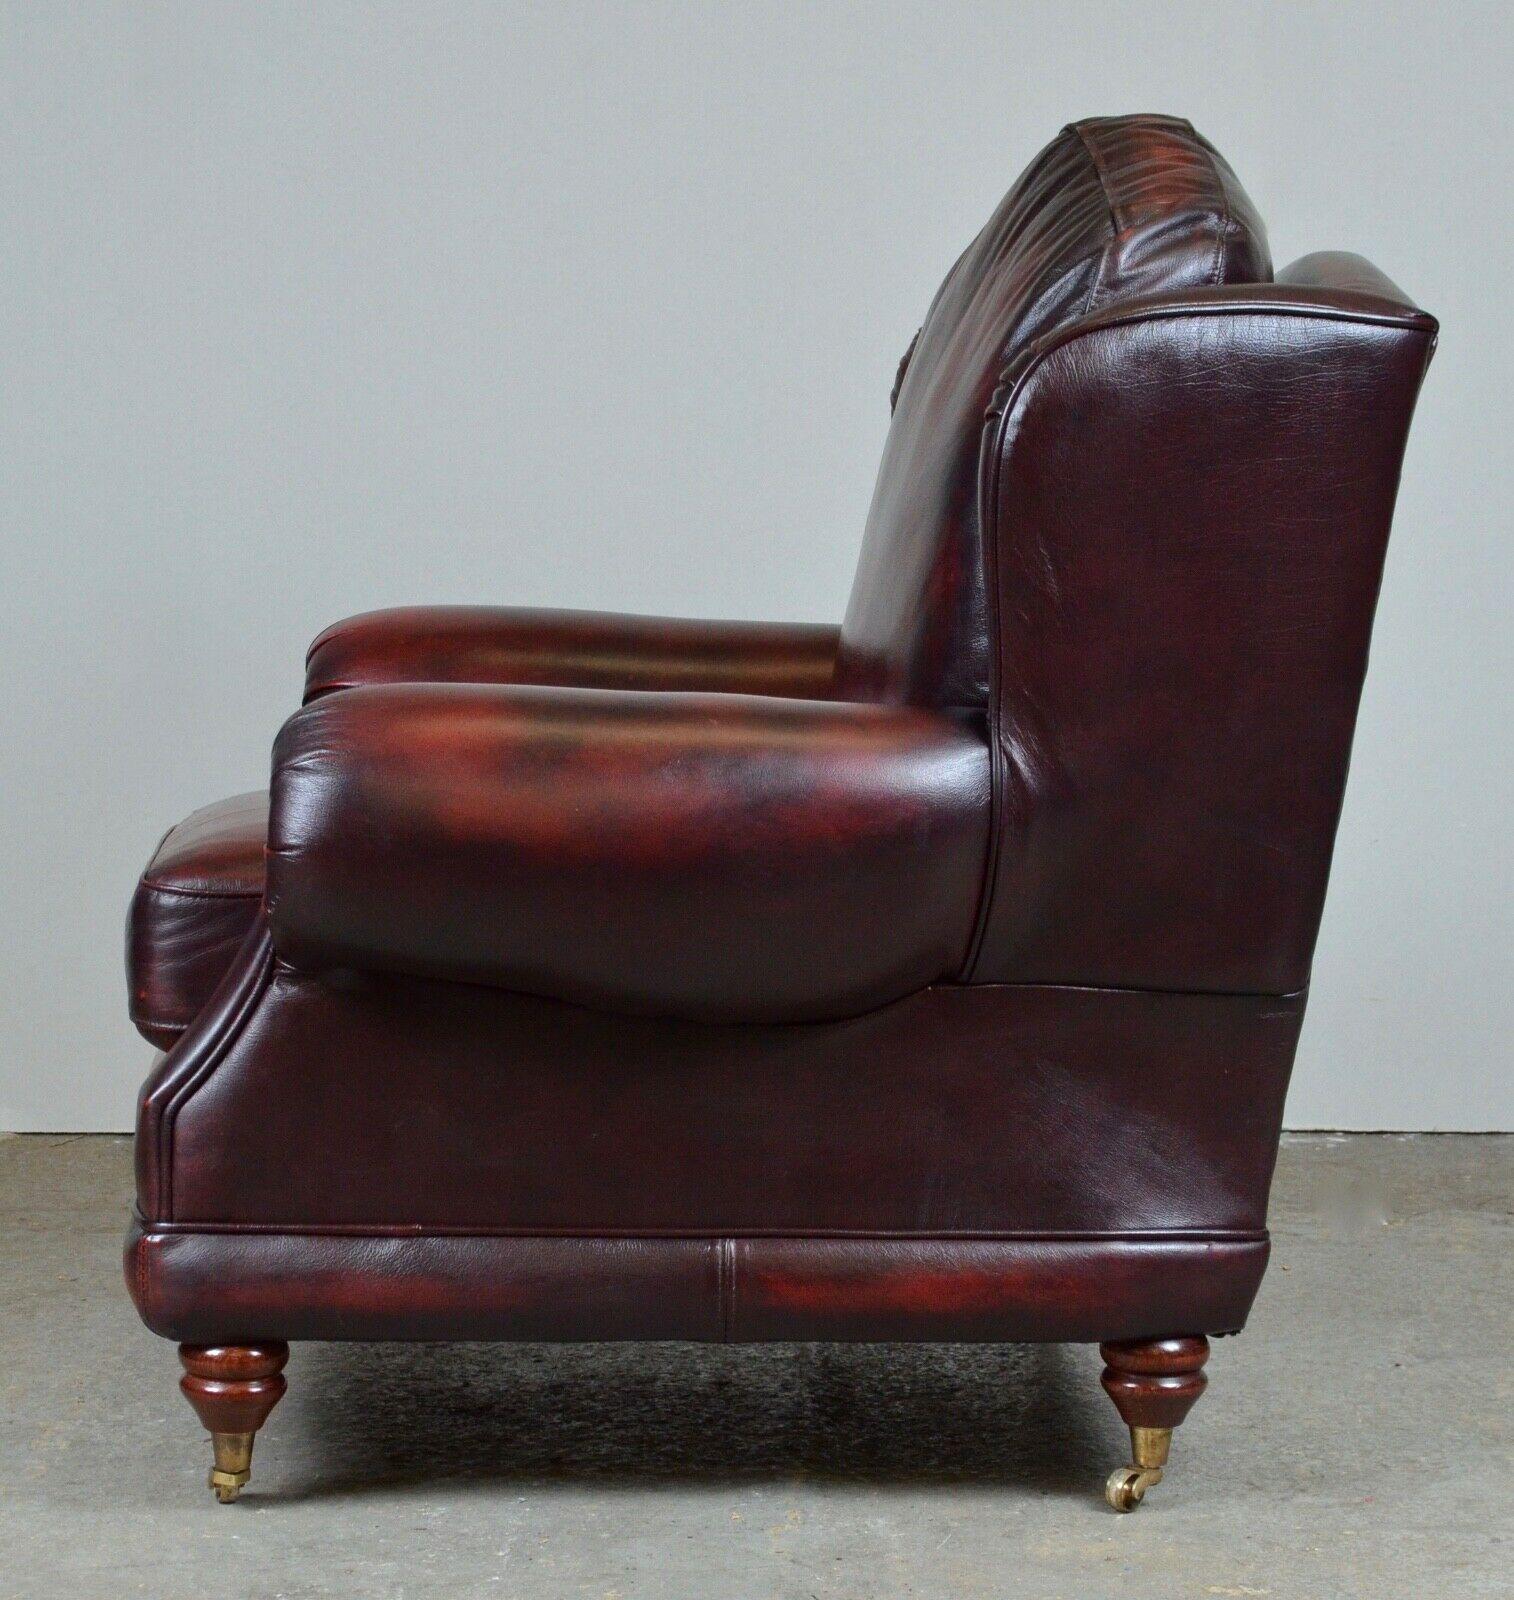 English THOMAS LLOYD OXBLOOD RED LEATHER ARMCHAiR MATCHING SOFA ALSO AVAILABLE